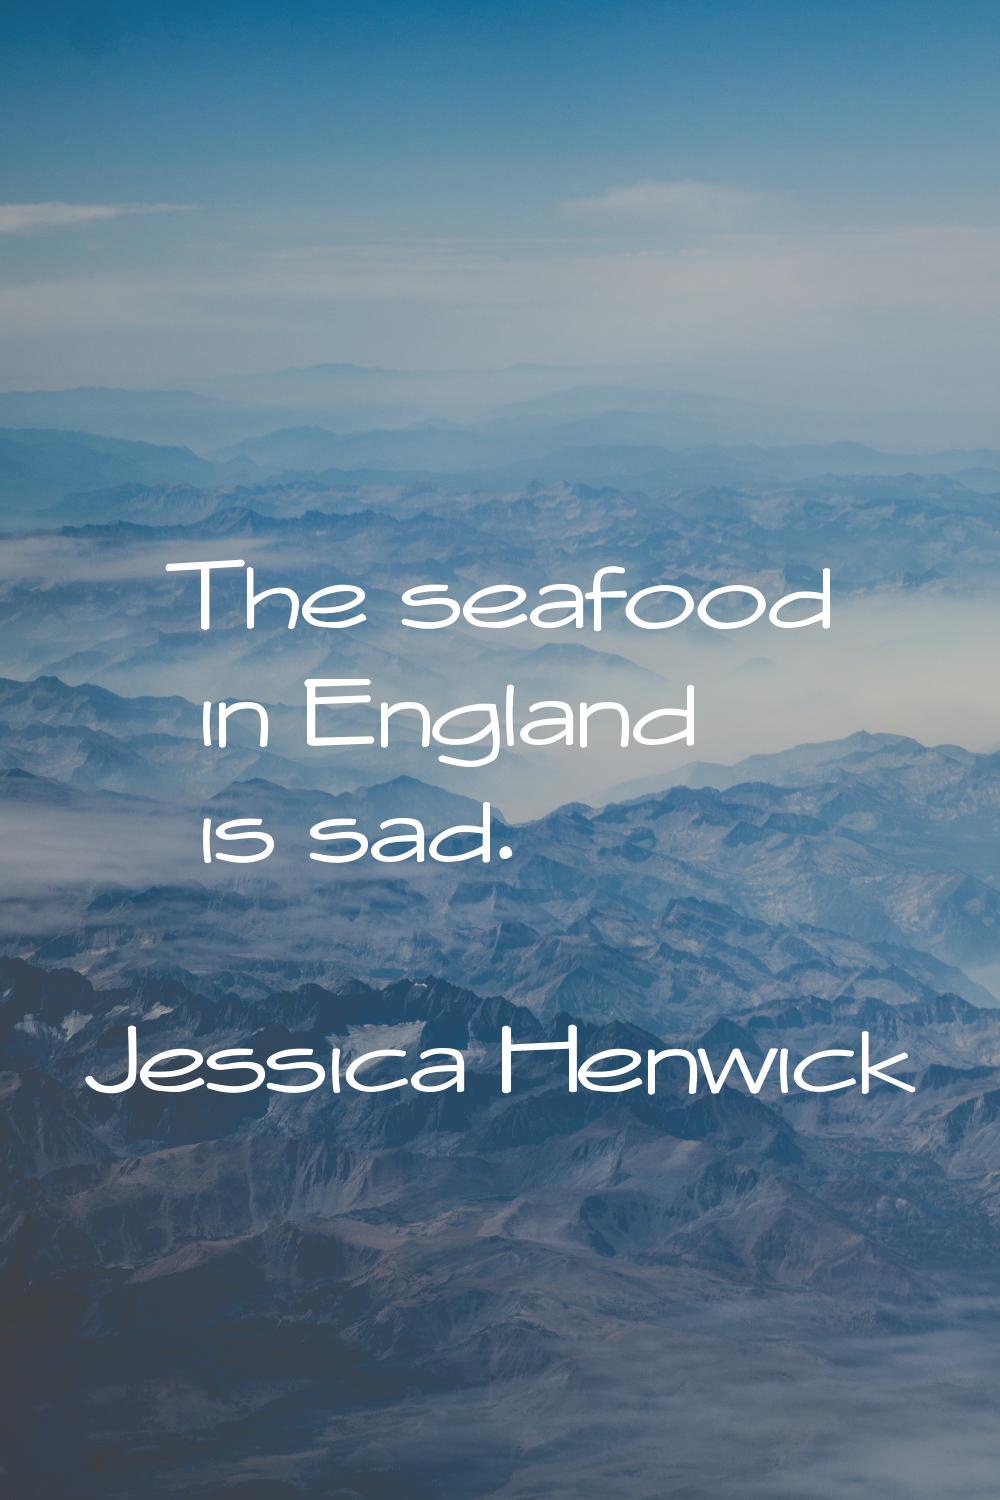 The seafood in England is sad.